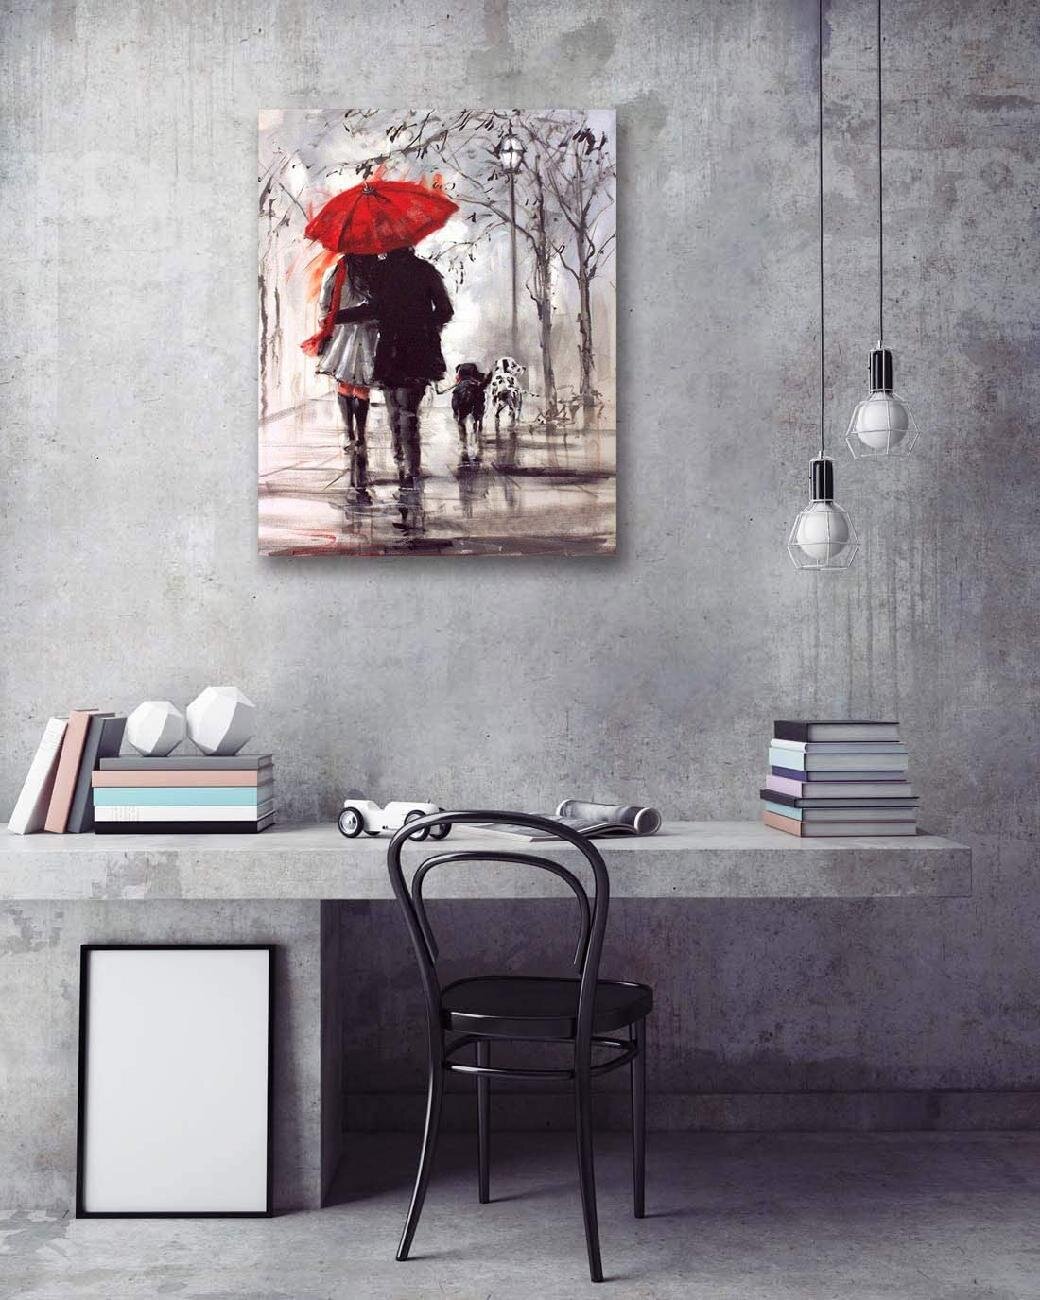 COUPLE WITH RED UMBRELLA OIL PAINT RE PRINT ON FRAMED CANVAS WALL ART DECORATION 